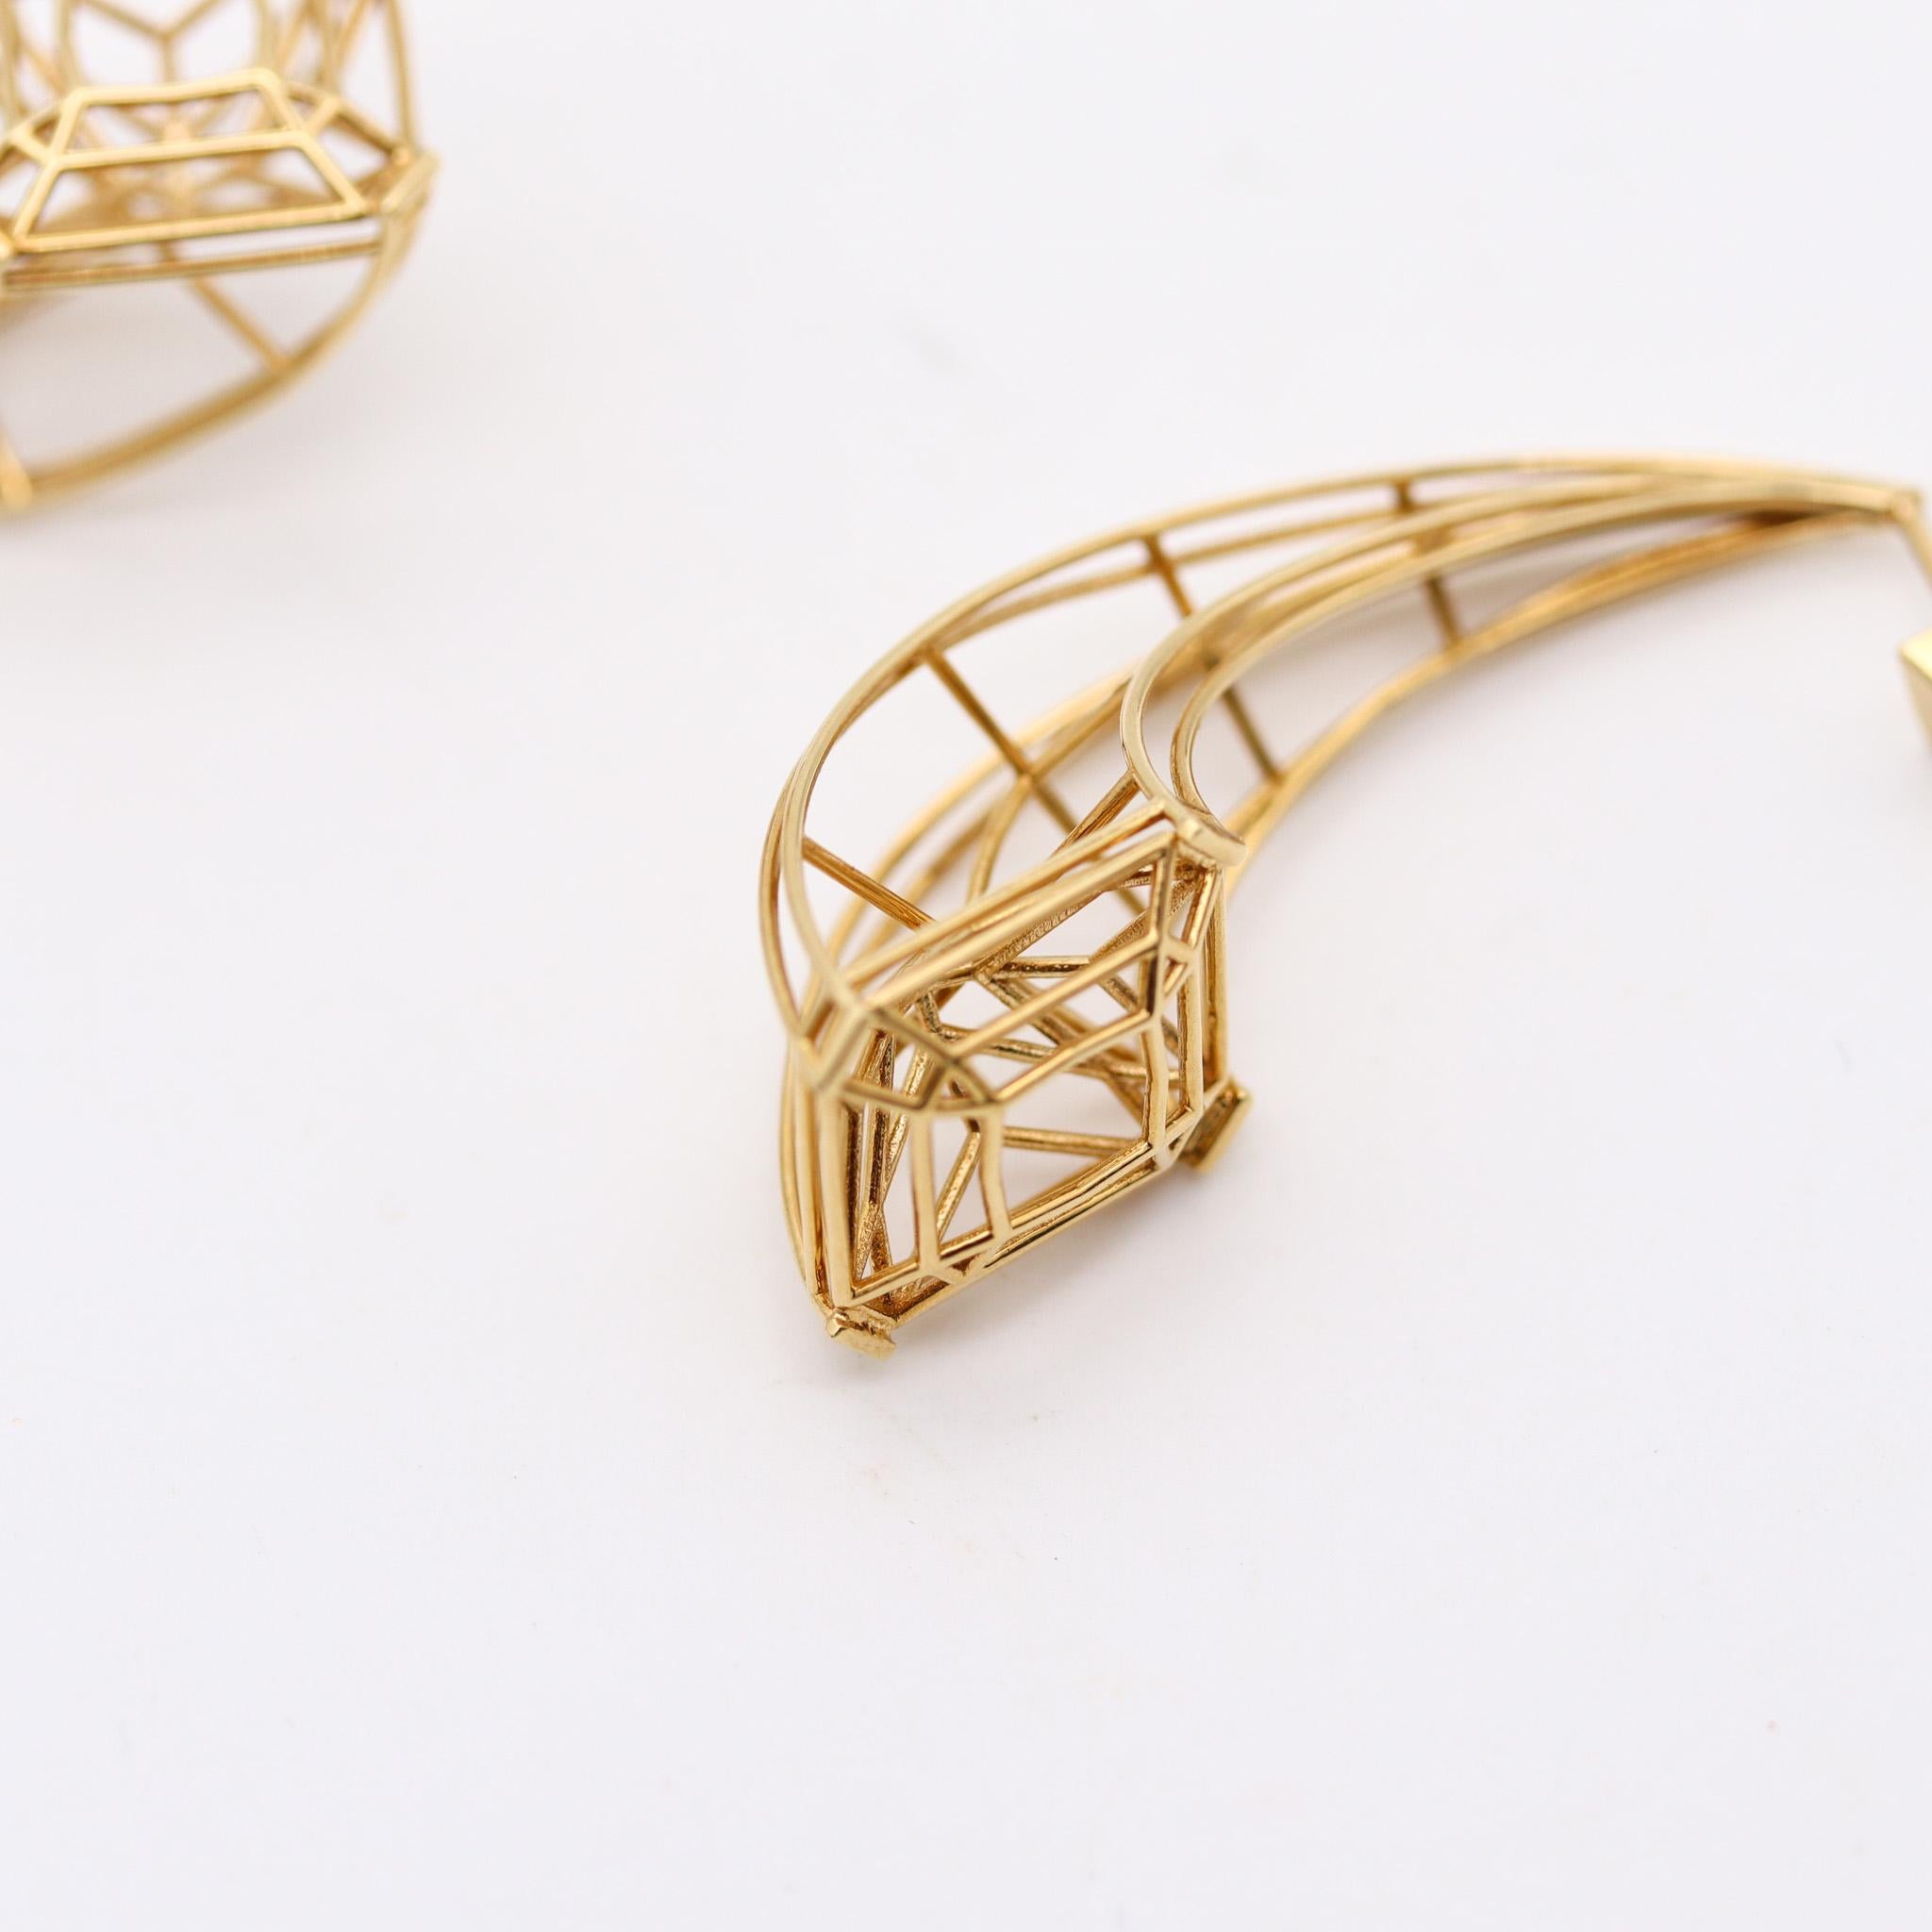 Peruffo Sculptural Geometric Three Dimensional Dangle Earrings 18Kt Yellow Gold In Excellent Condition For Sale In Miami, FL